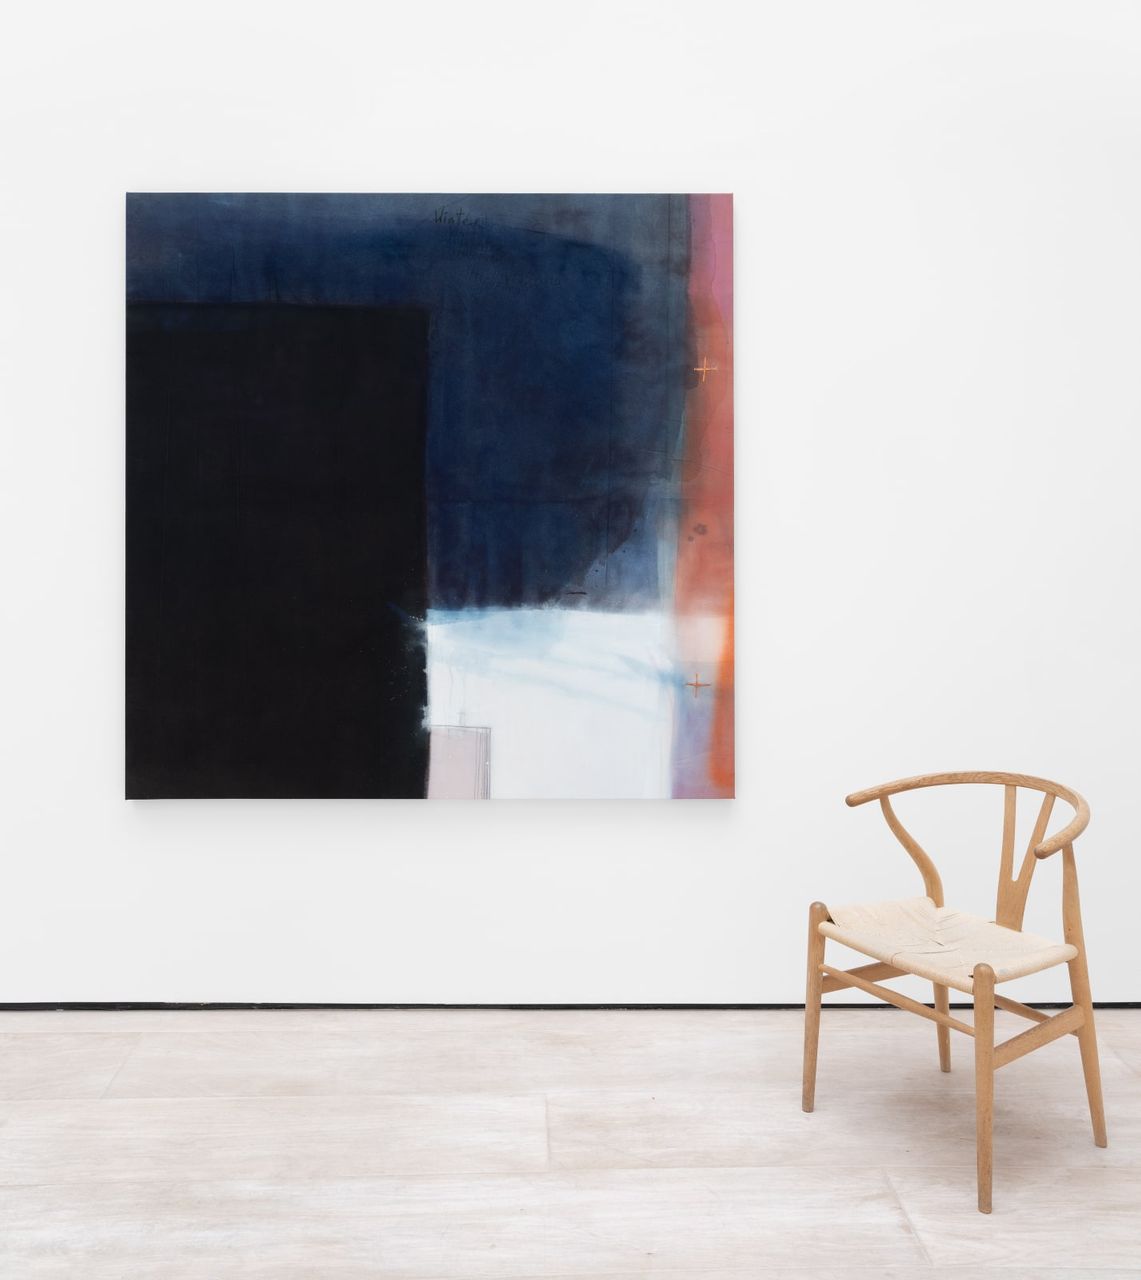 Winter, 2019 | Copper, rainwater, charcoal and pigments in acrylic resin on canvas 159 x 160 cm